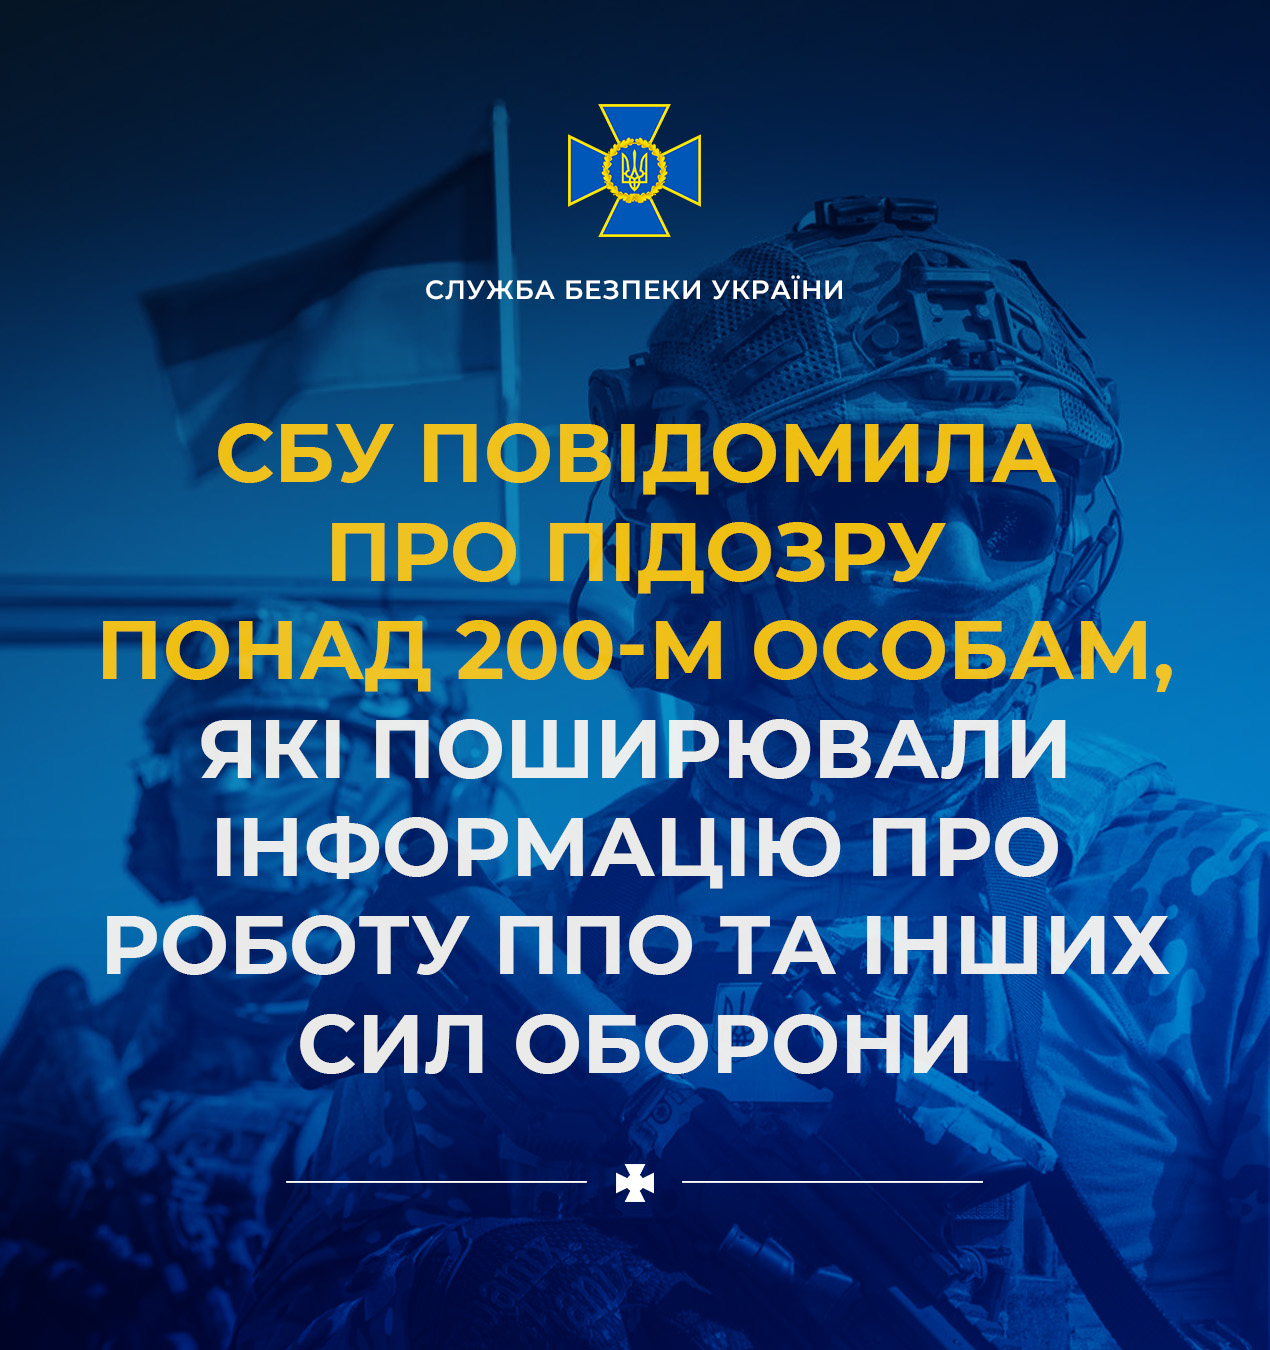 SBU notifies around 200 people for illegally spreading information about Ukrainian forces (Image Courtesy: Facebook)